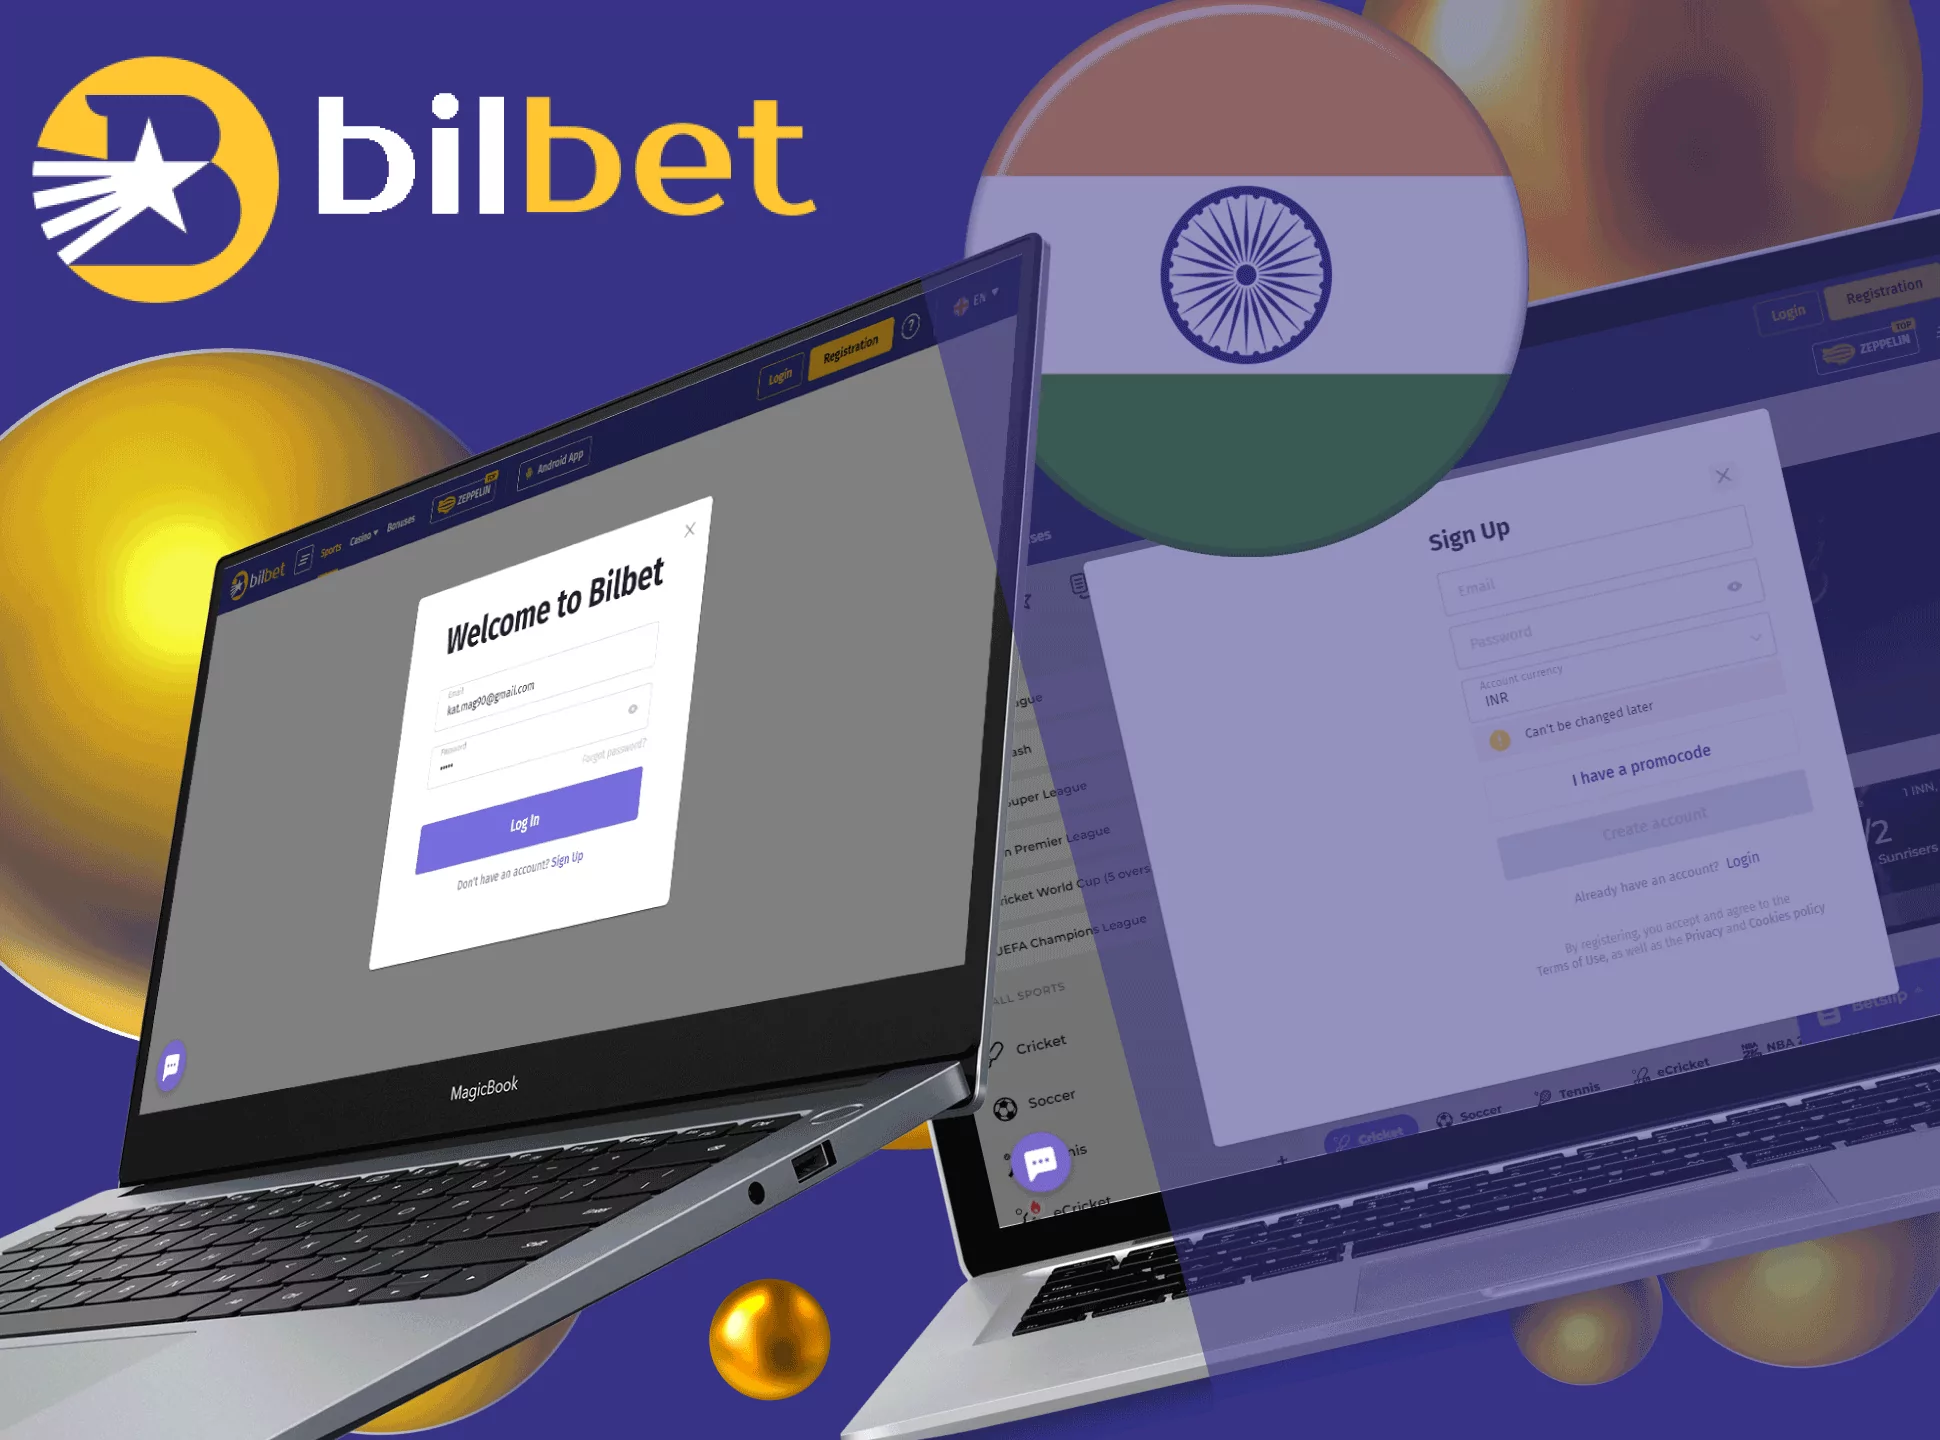 Enter your username and password to log in to Bilbet.